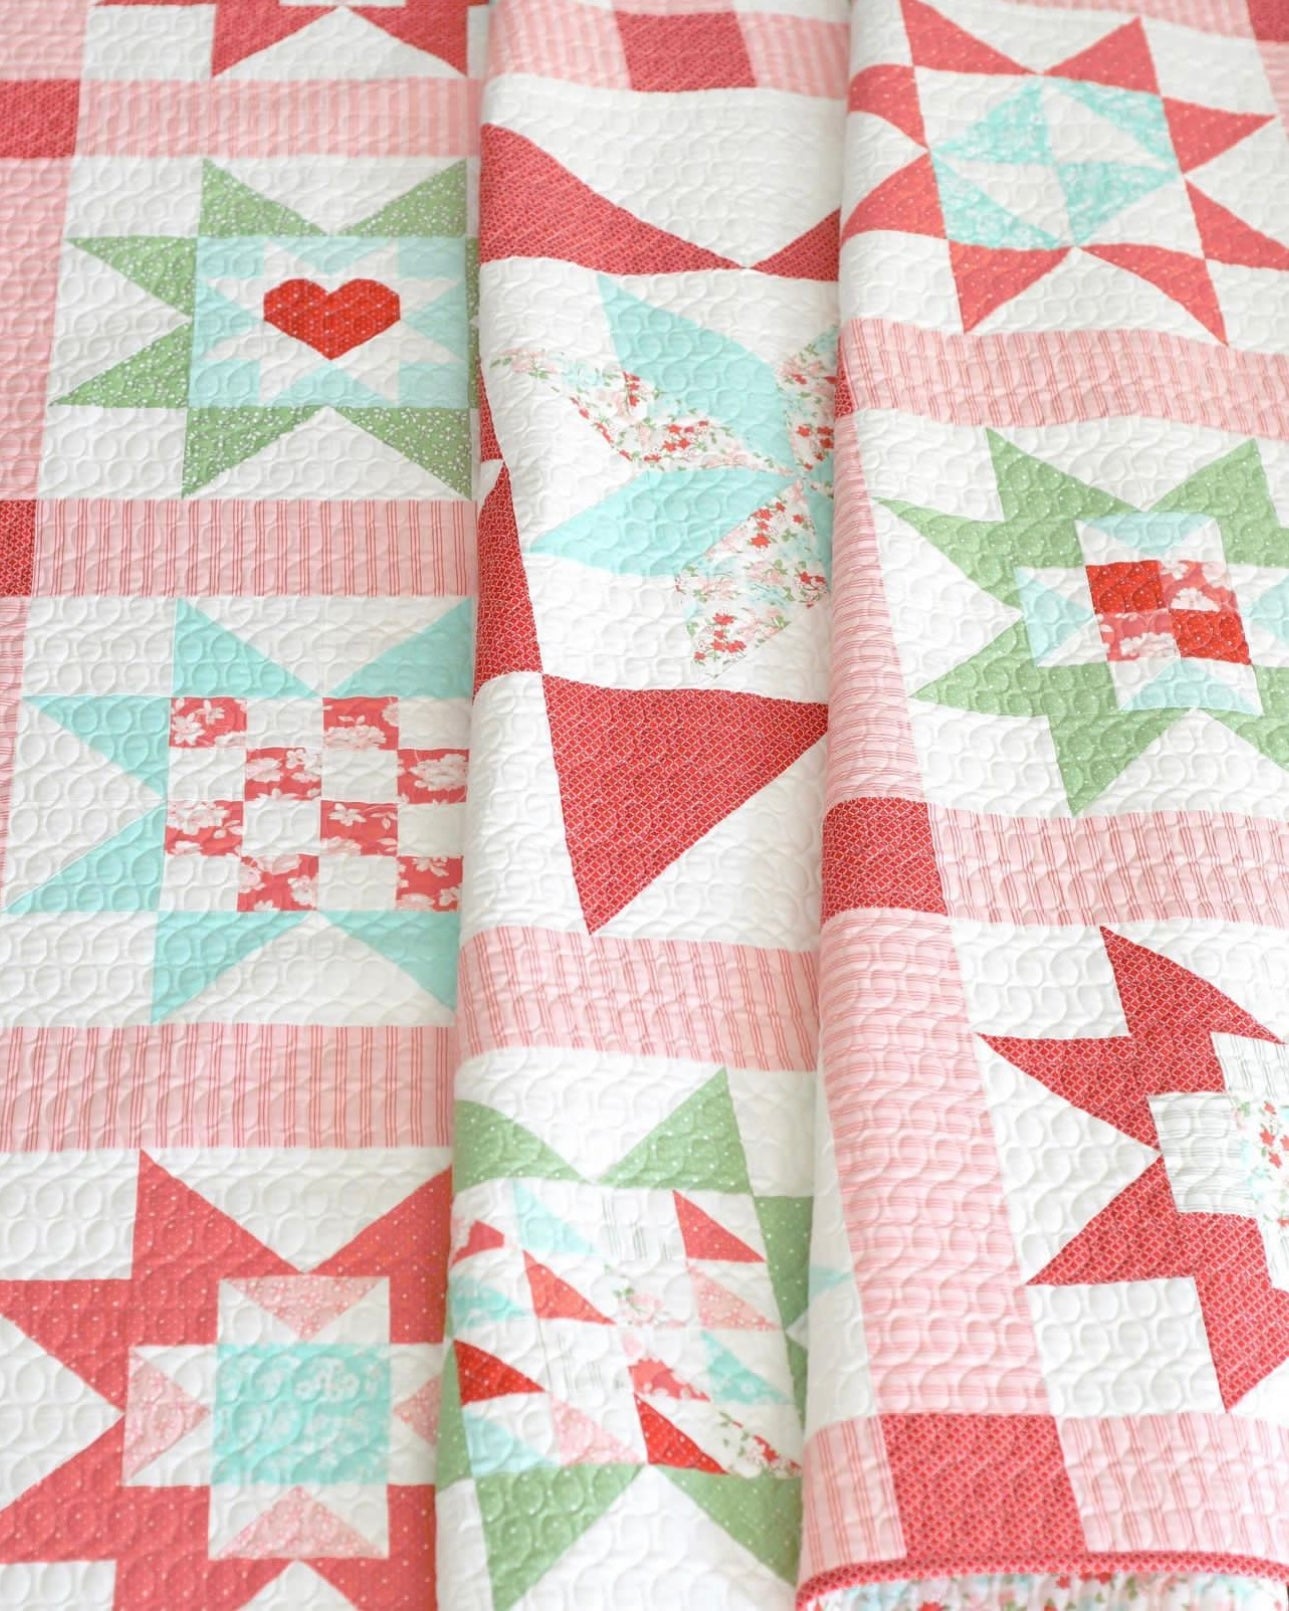 Adore Boxed Quilt Kit by @Thimbleblossoms